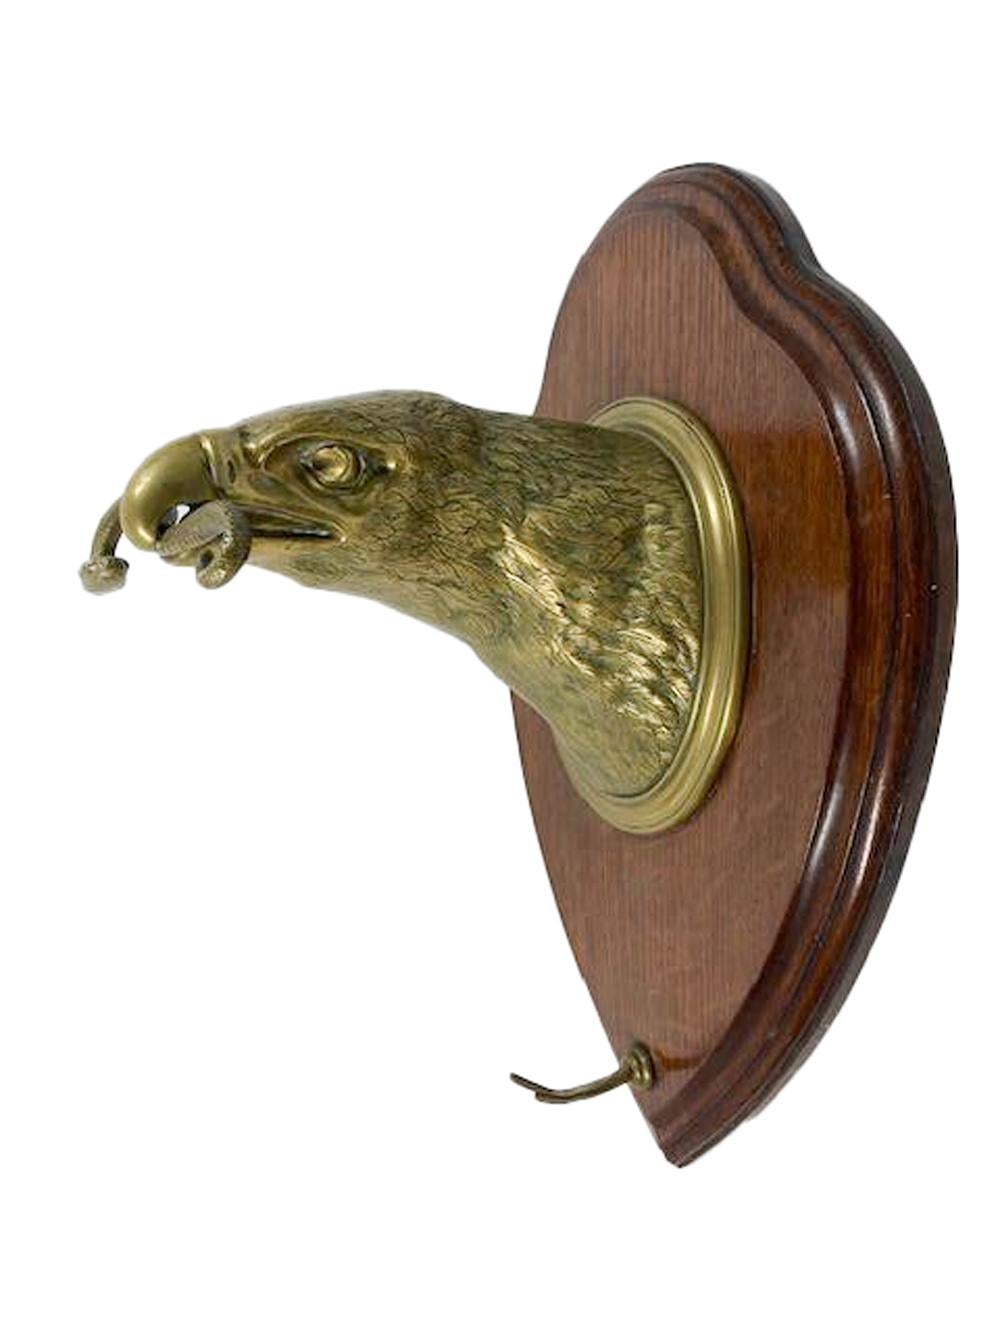 Wall Mounted Brass Eagle Head on Oak Plaque Holding a Dinner Gong by Wm. Tonks For Sale 5